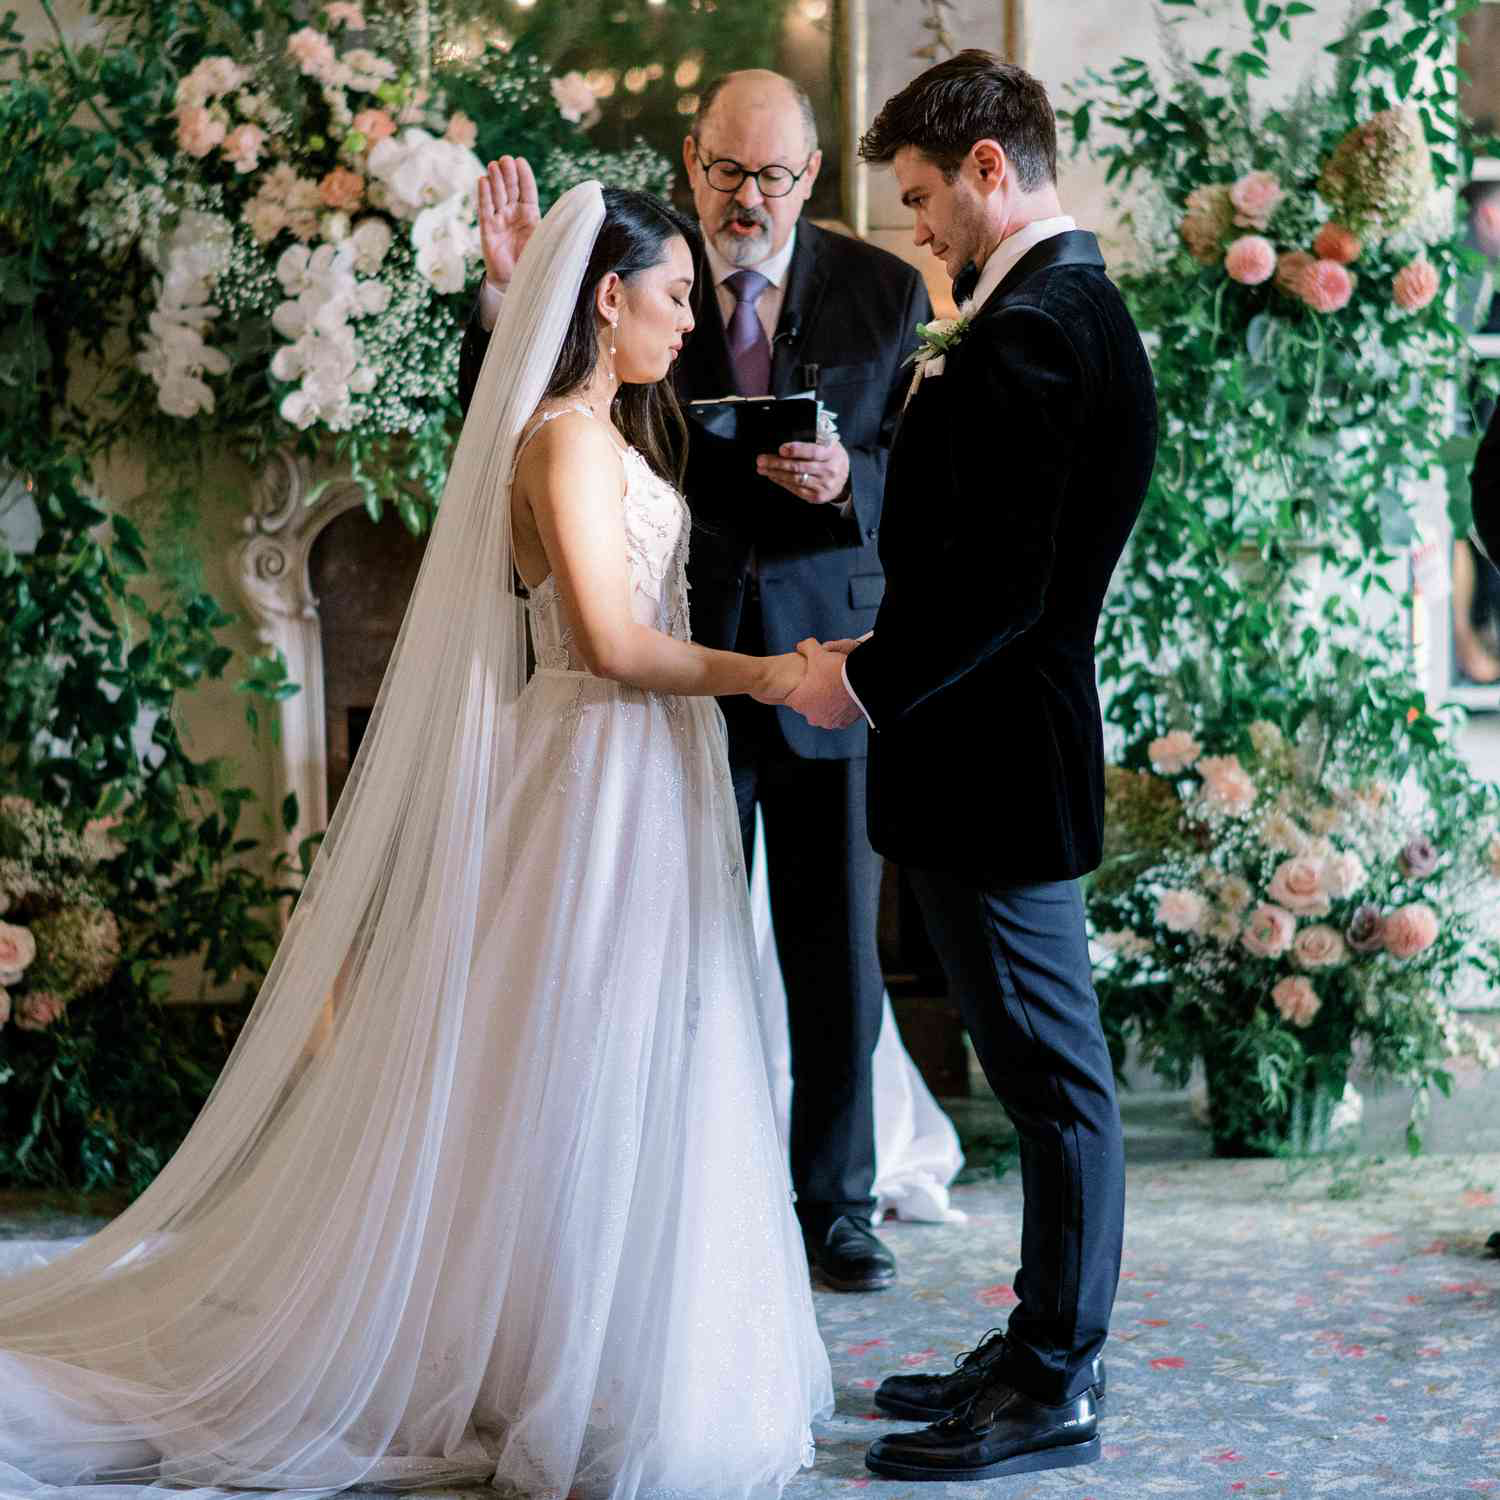 The Best Wedding Vows of All Time